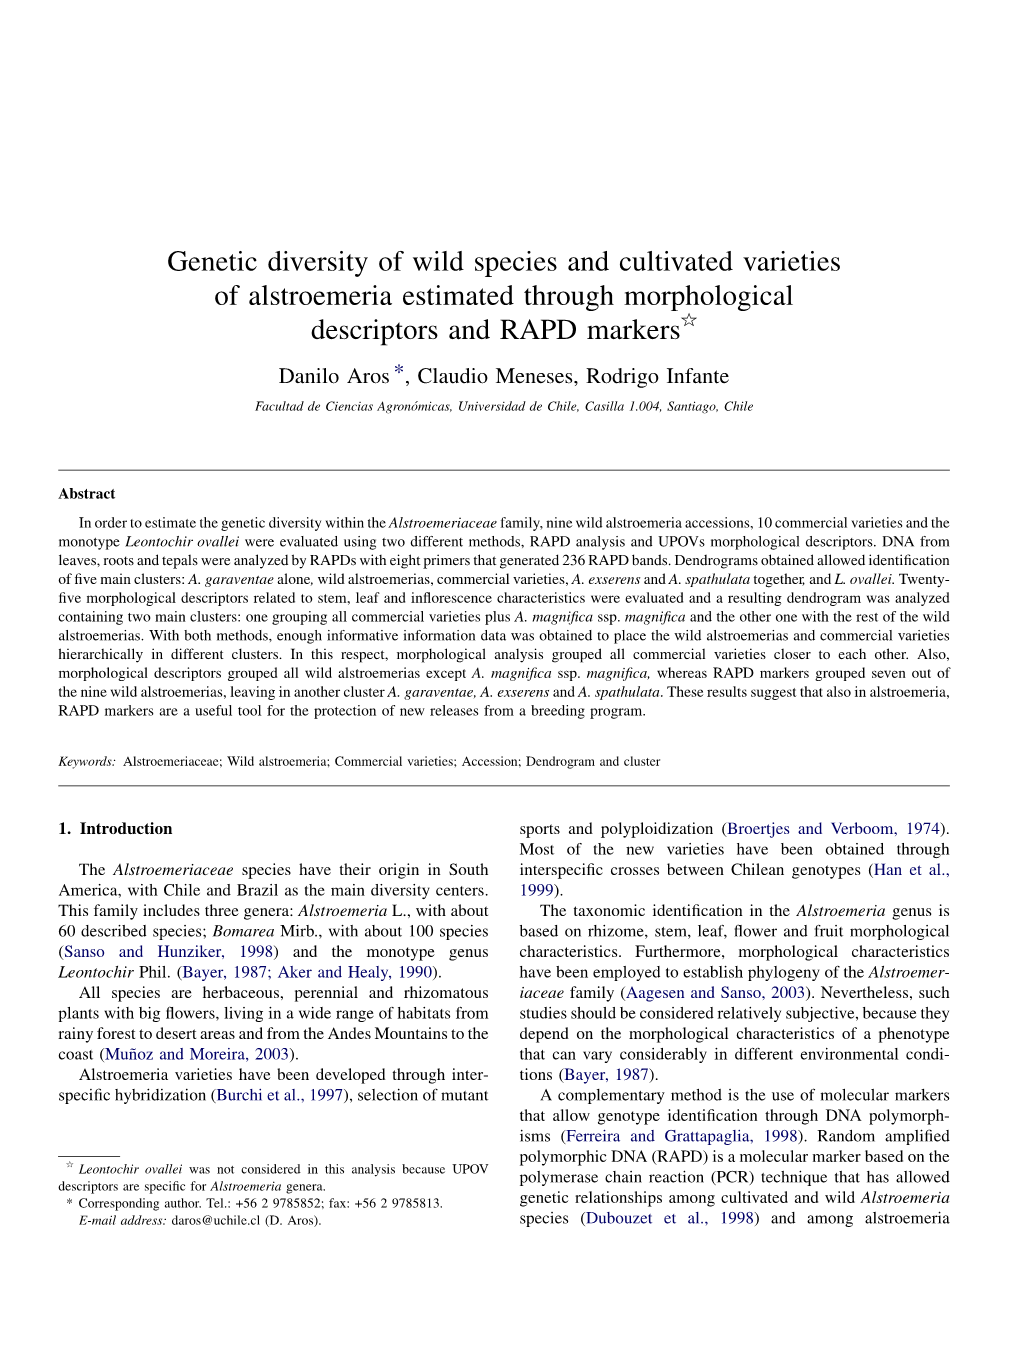 Genetic Diversity of Wild Species and Cultivated Varieties of Alstroemeria Estimated Through Morphological Descriptors and RAPD